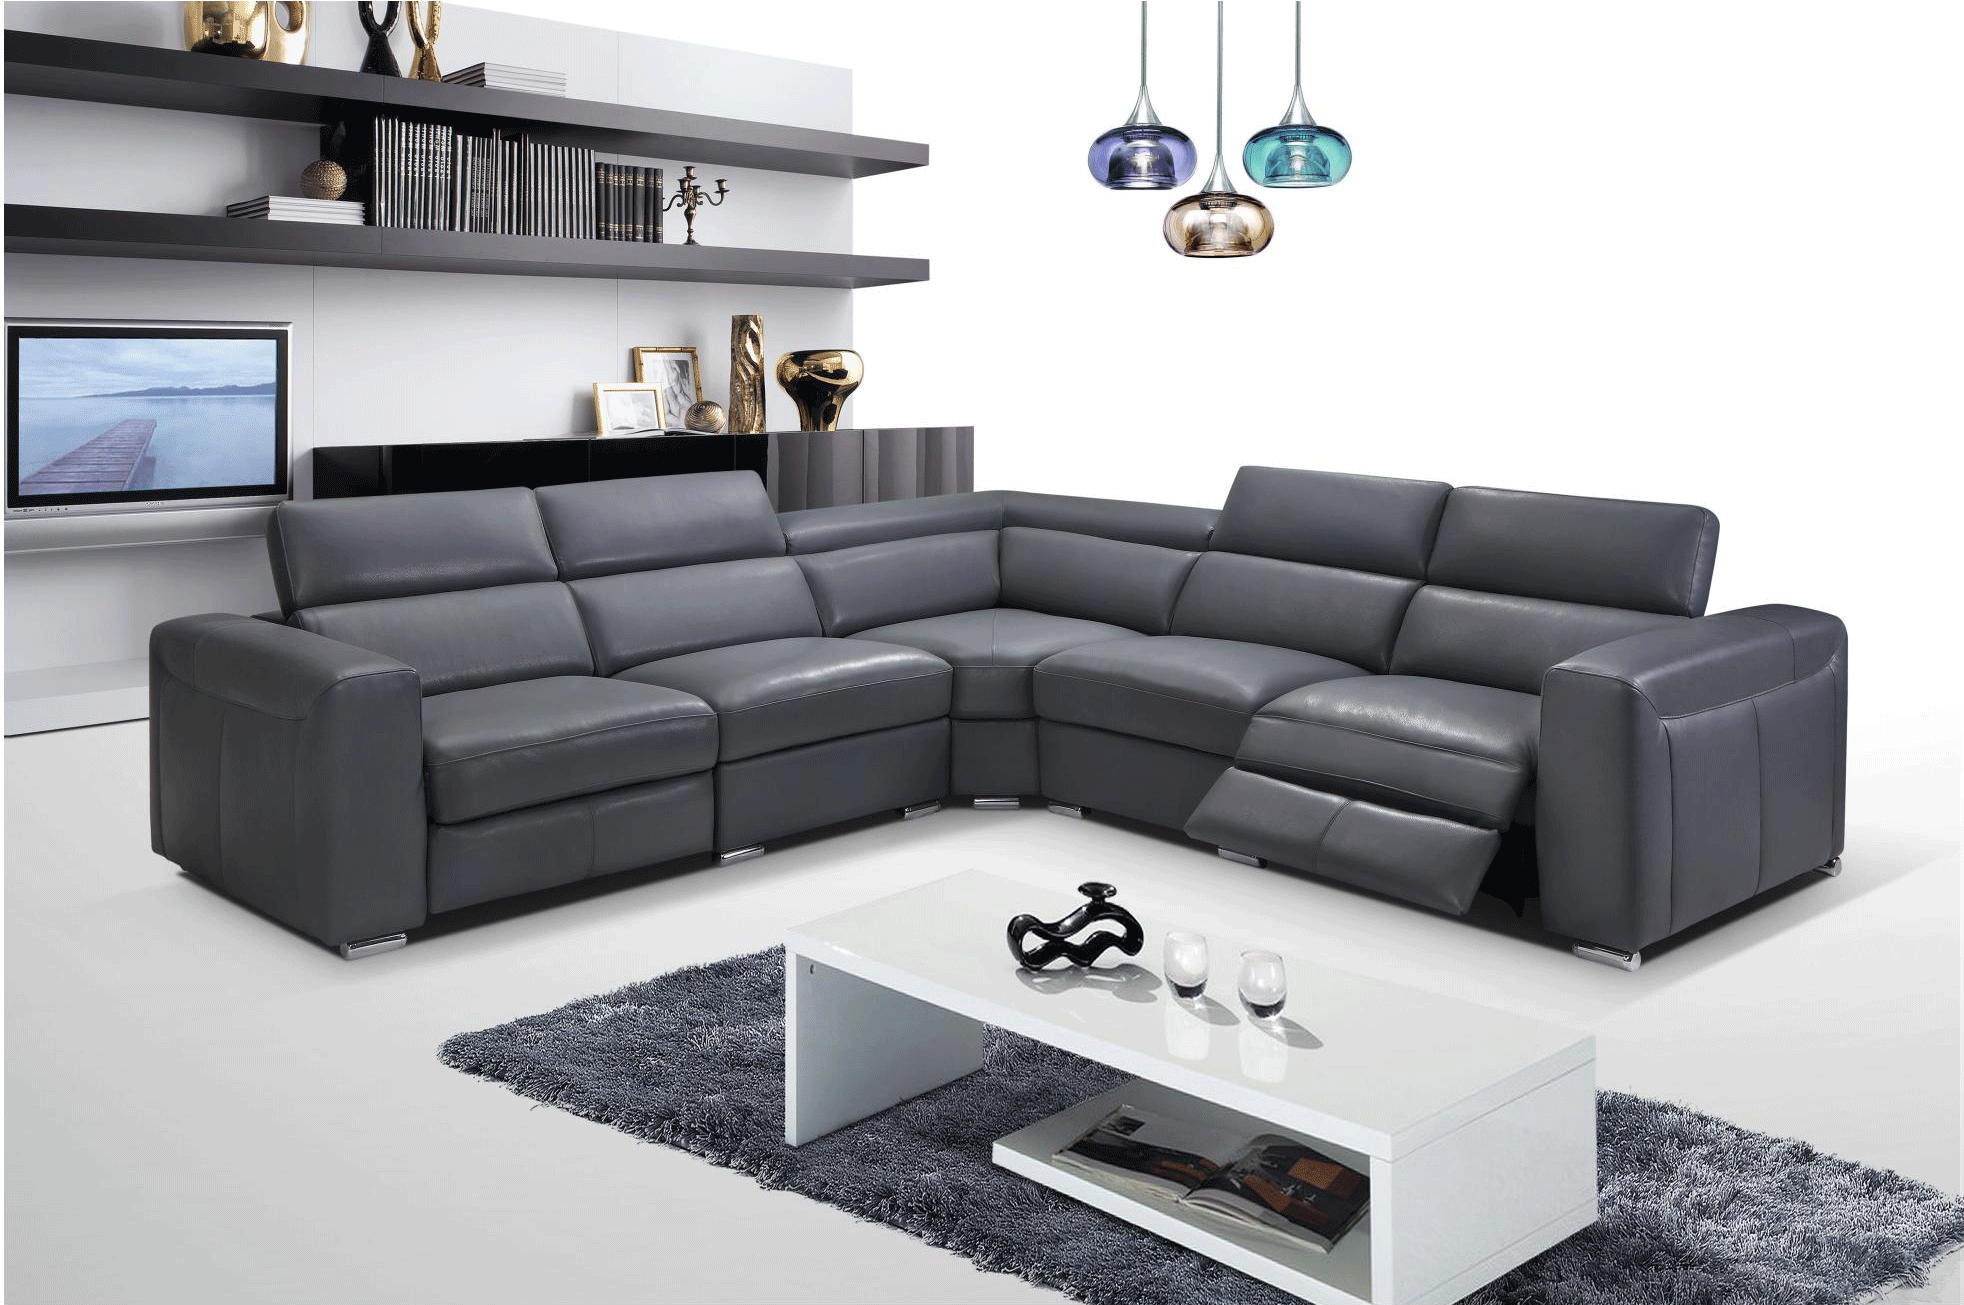 Brands Kuka Home 2919 Sectional w/ recliners